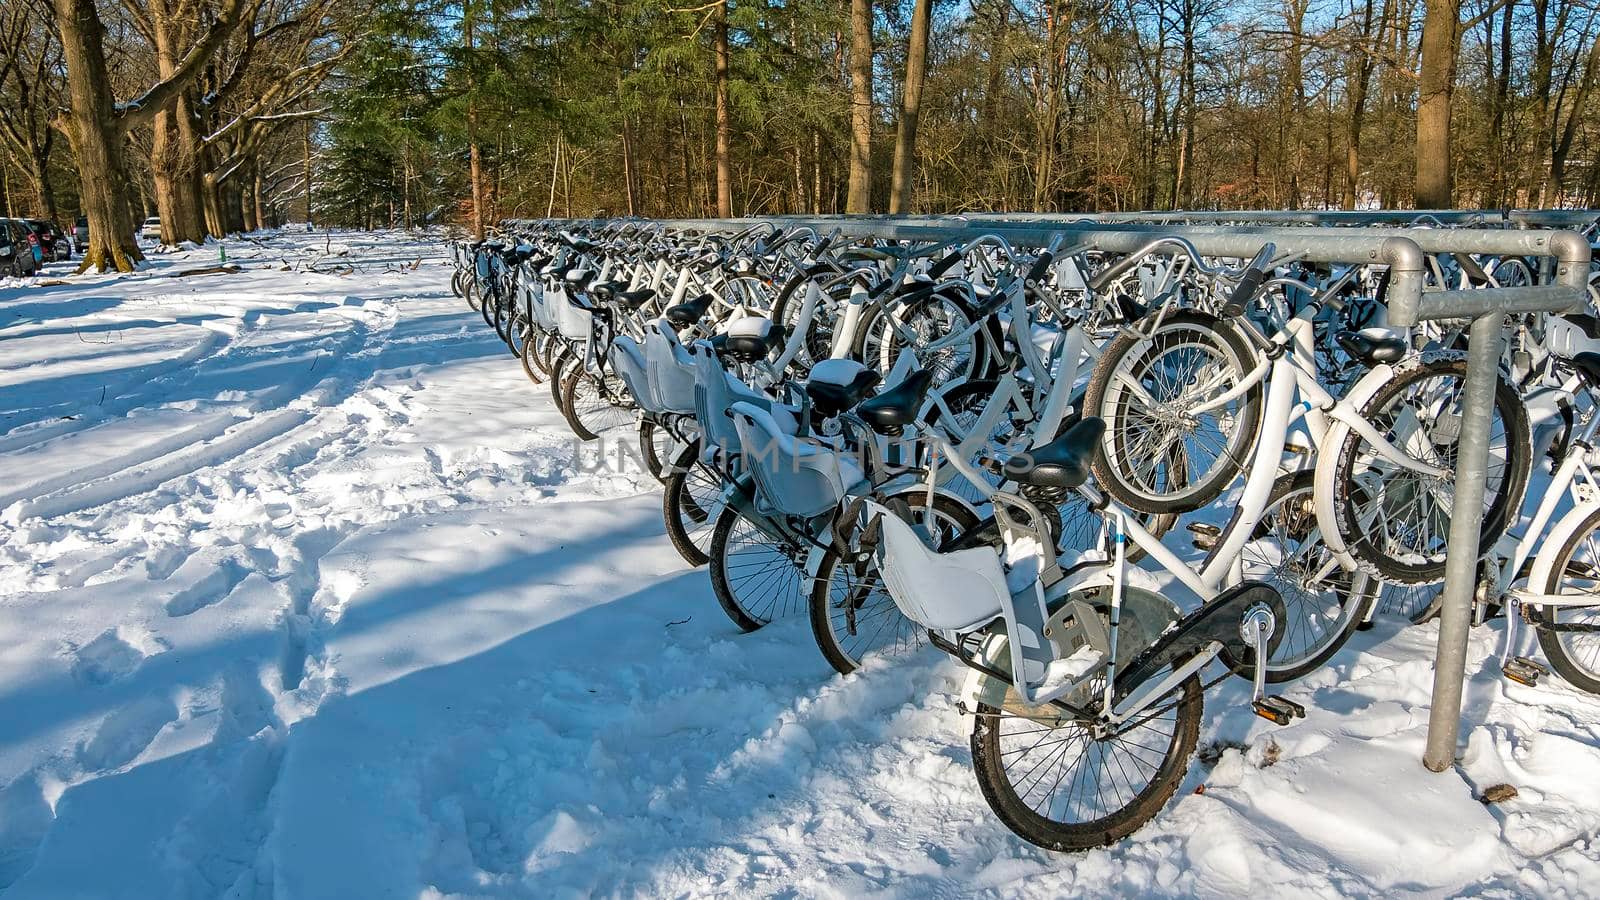 Lots of snowy bikes on national park de Hoge Veluwe in the Netherlands in winter by devy